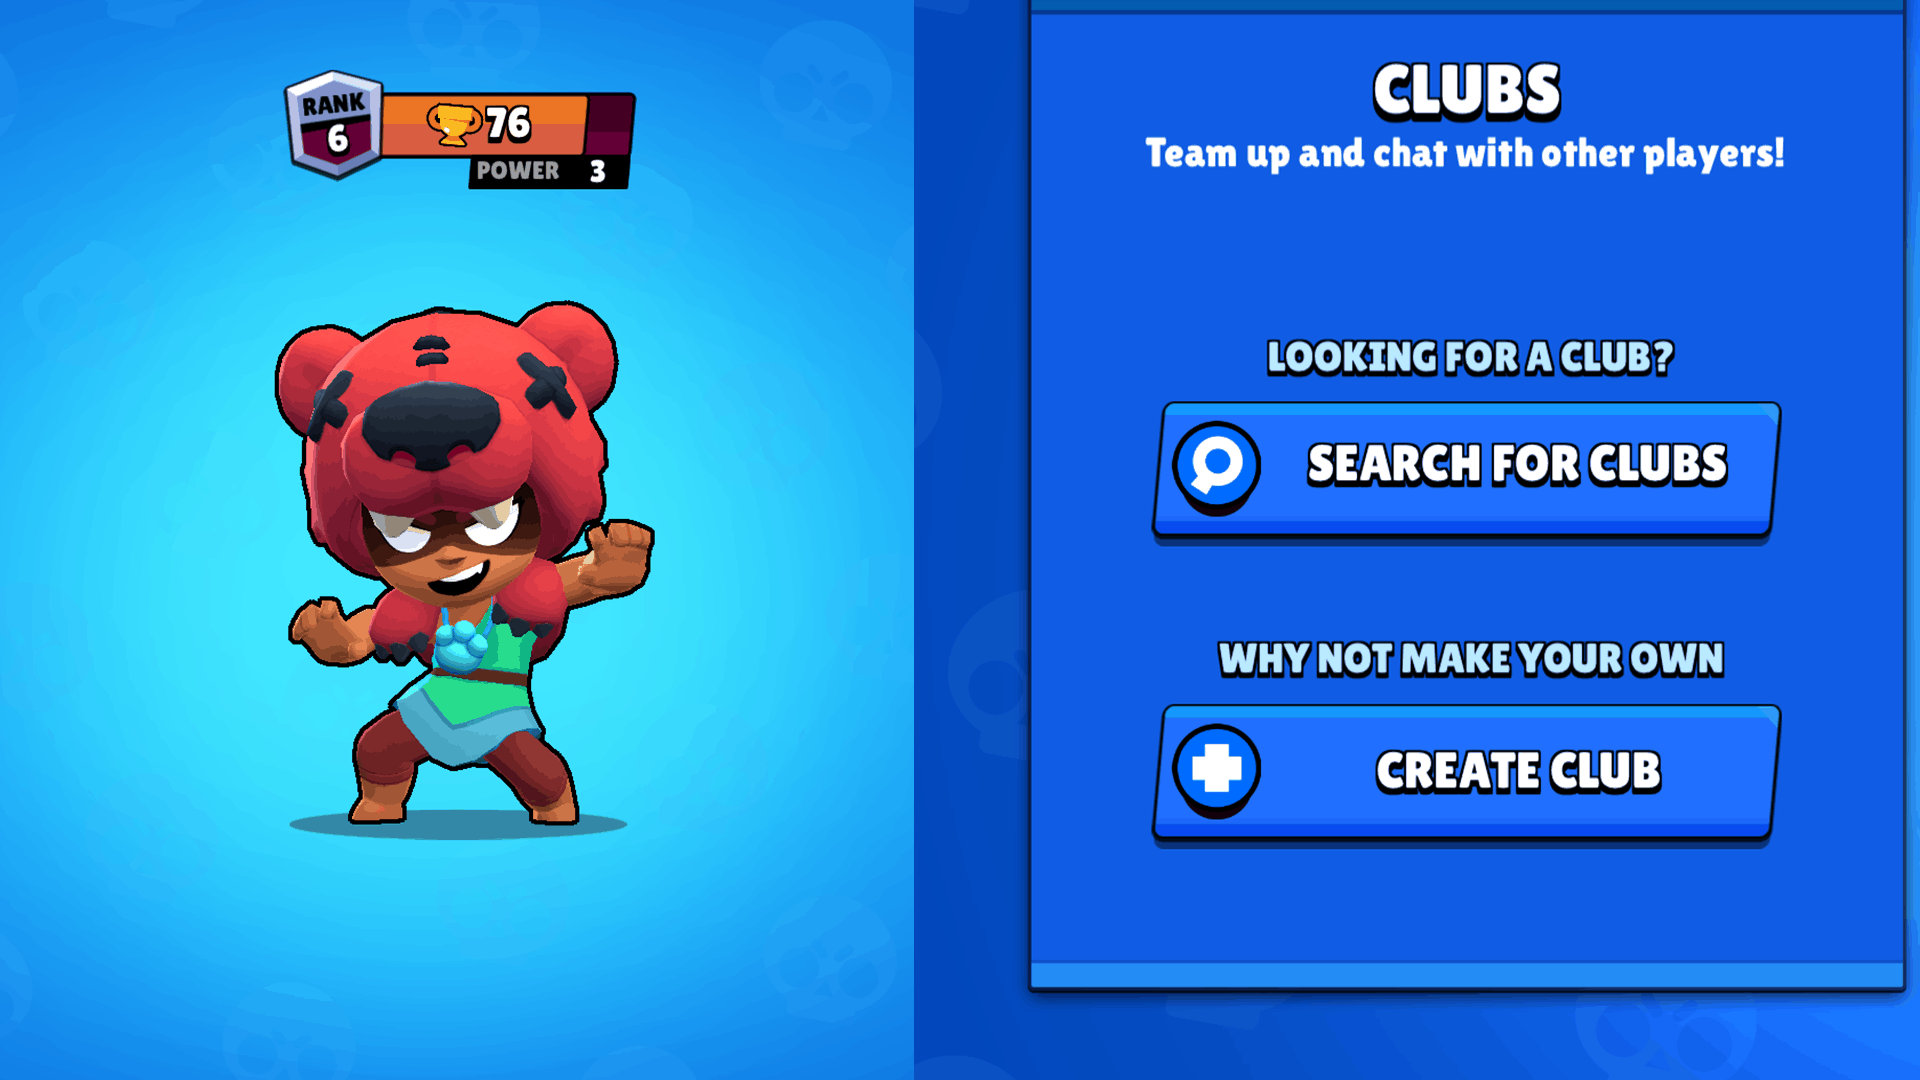 You are currently viewing Brawl Stars Full Clubs Guide – How To Join & Create a Club